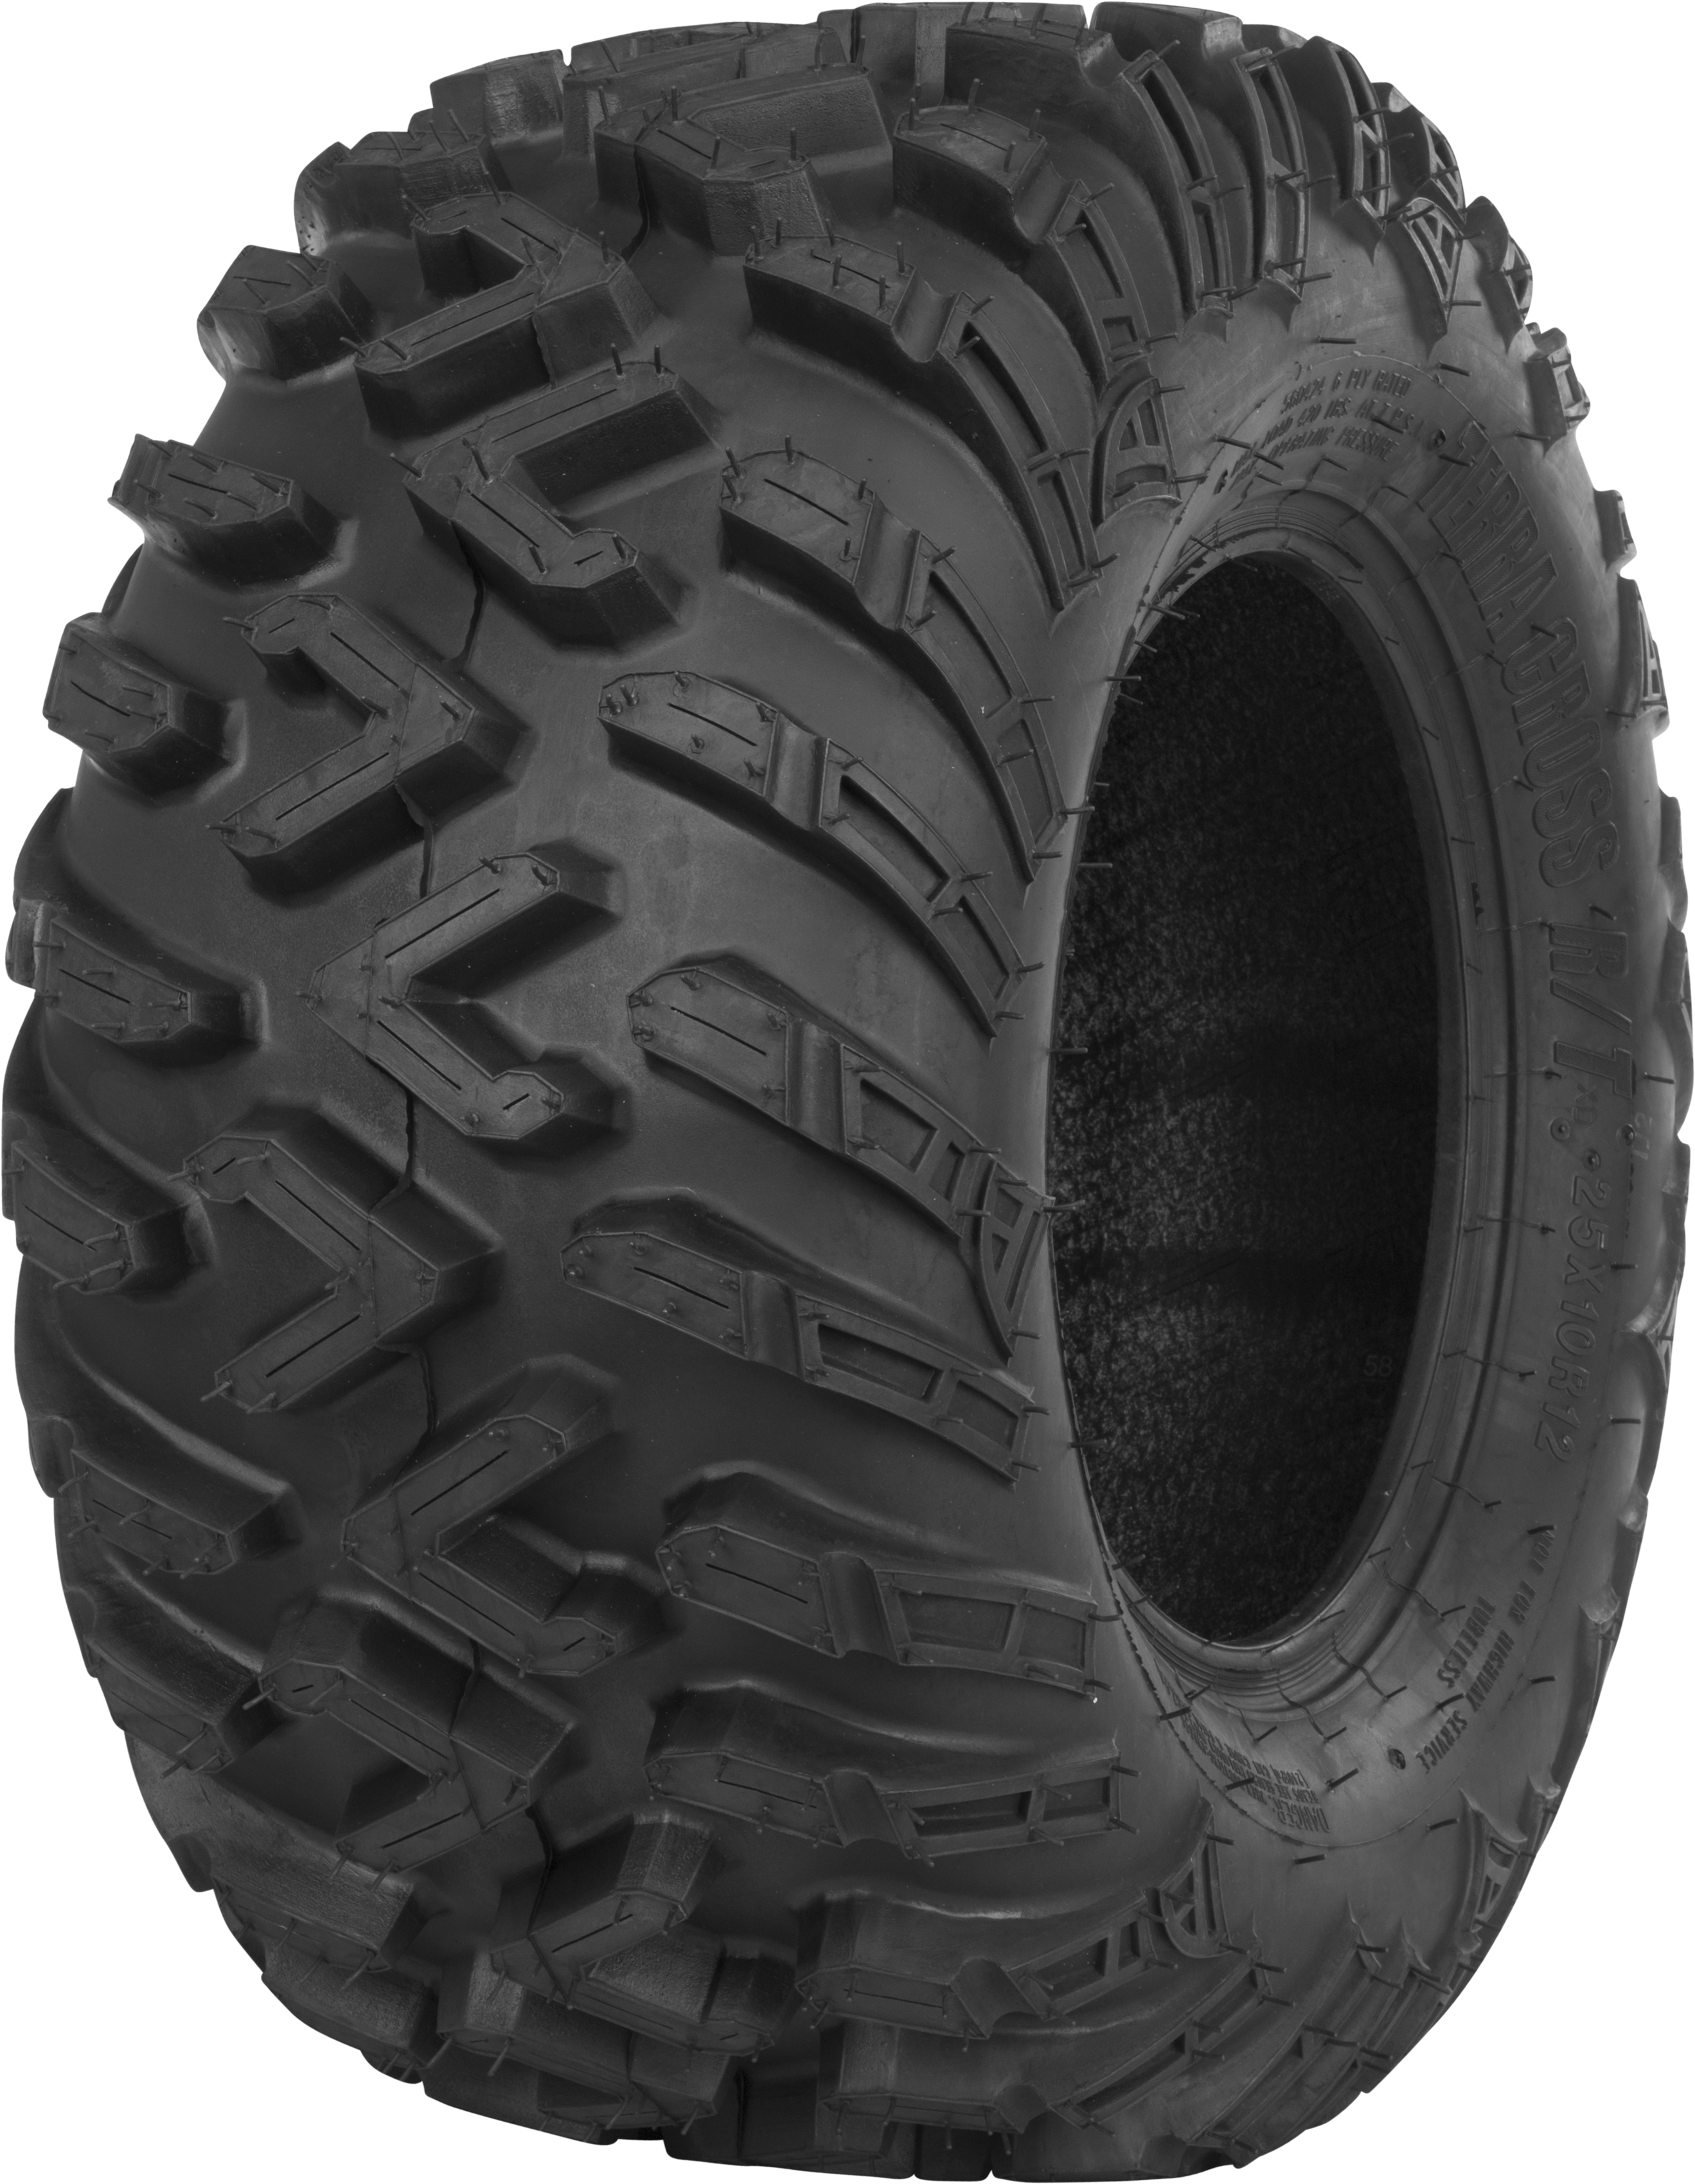 TERRACROSS R/T REAR TIRE 26X11-12 6 -PLY - Click Image to Close